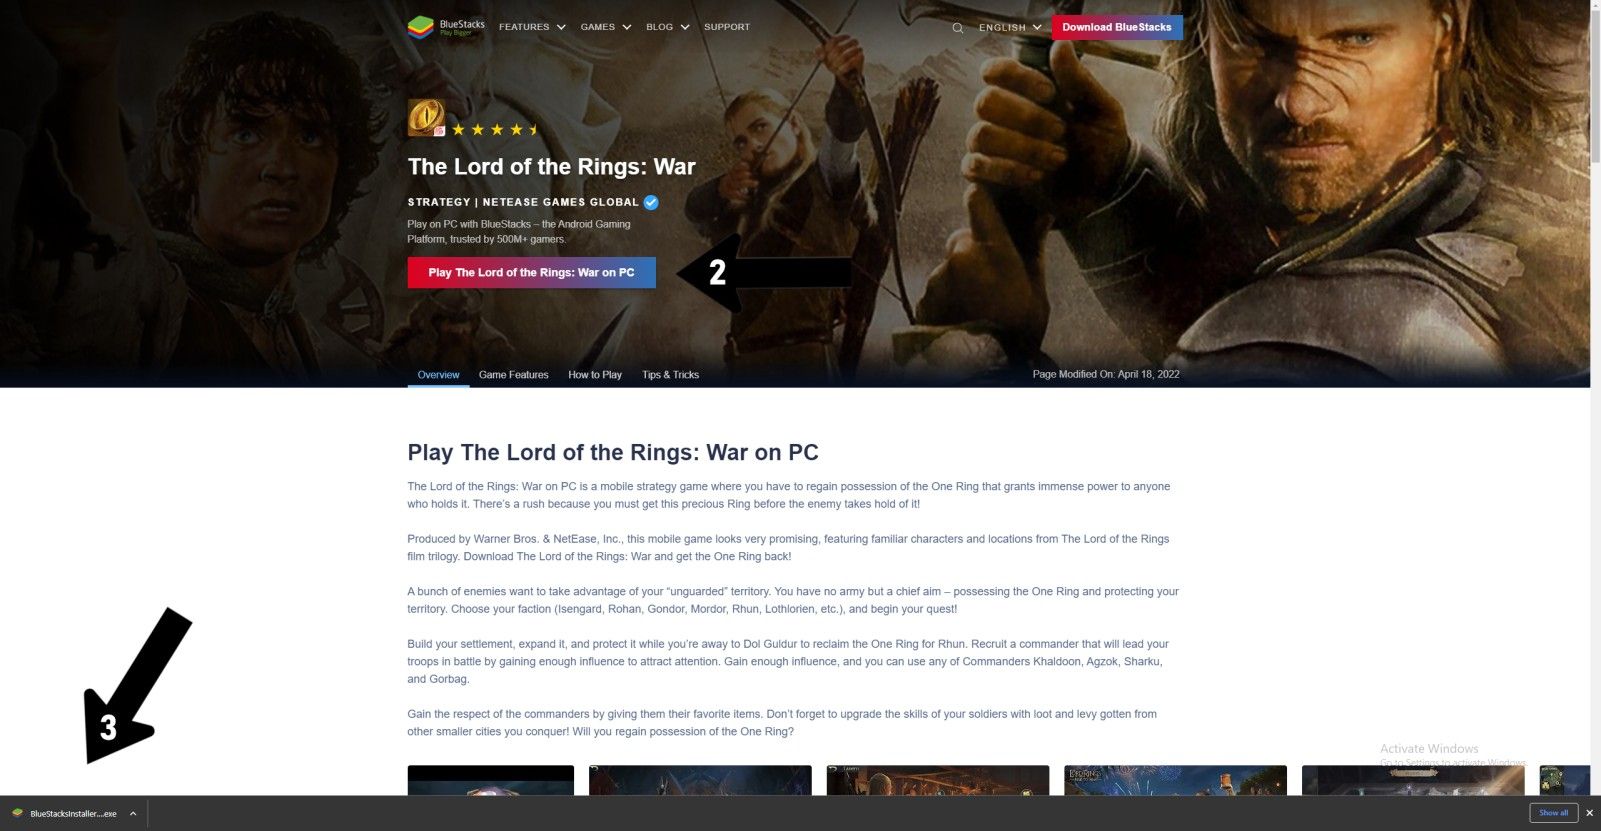 How to log in to The Lord of the Rings: War using your Twitter account on  BlueStacks 5 – BlueStacks Support